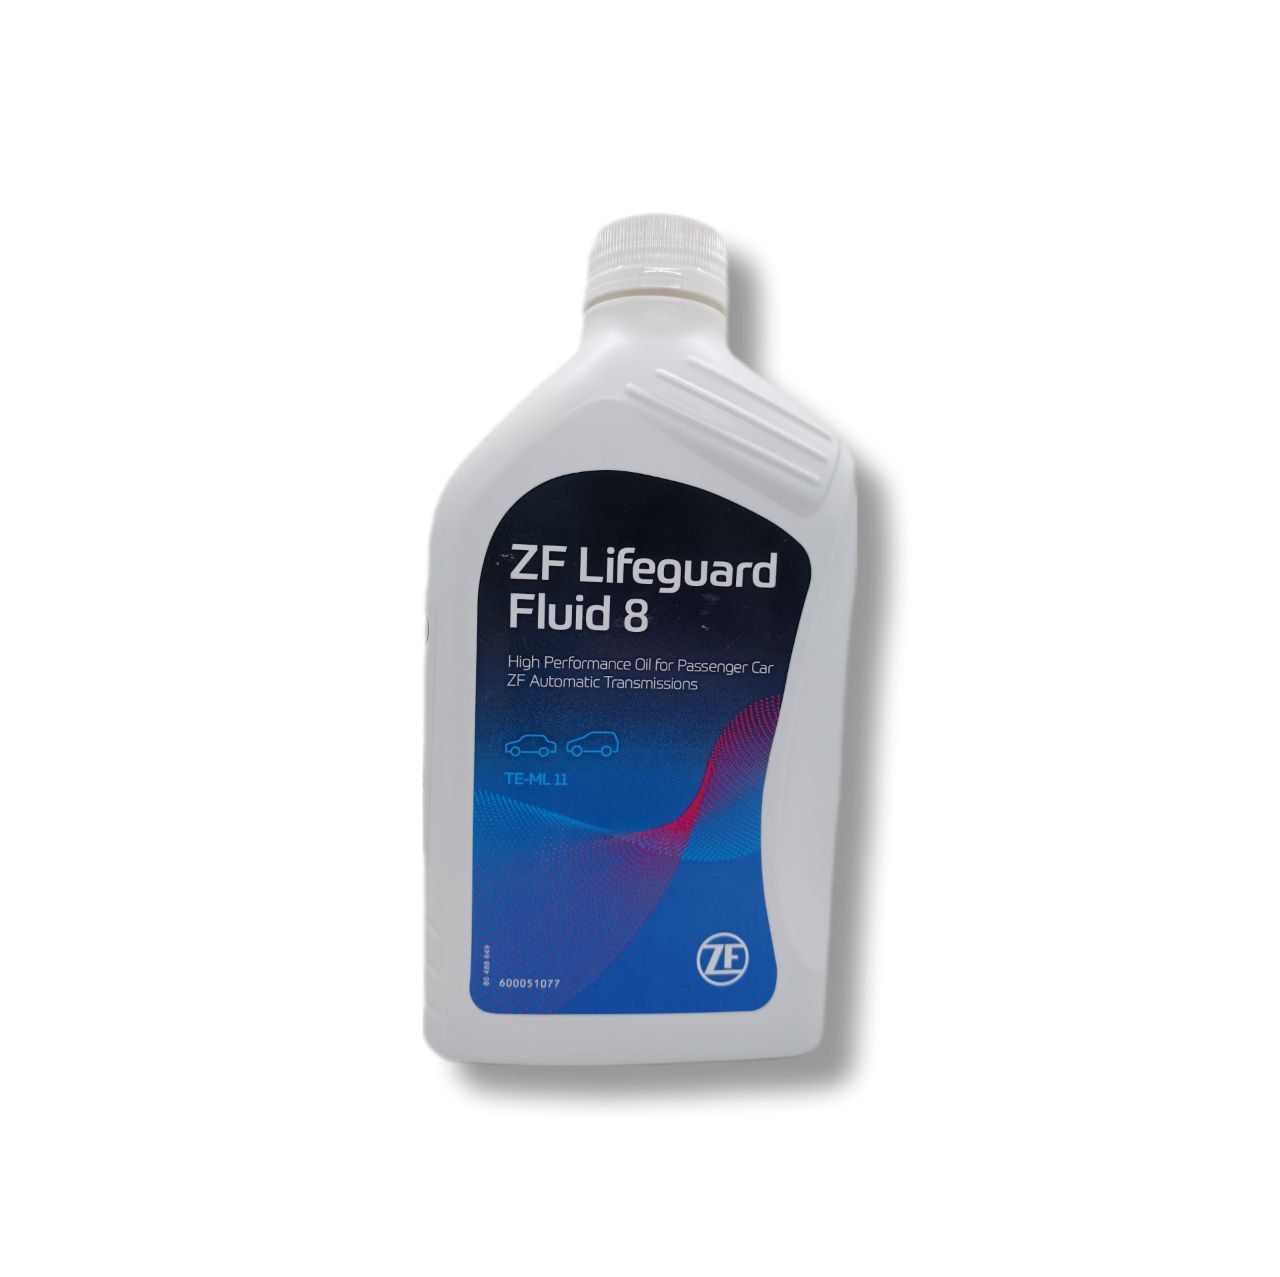 Atf zf. ZF s671 090 255. Масло ZF LIFEGUARDFLUID 6. Масло ZF LIFEGUARDFLUID 8. ZF LIFEGUARDFLUID 6 артикул.